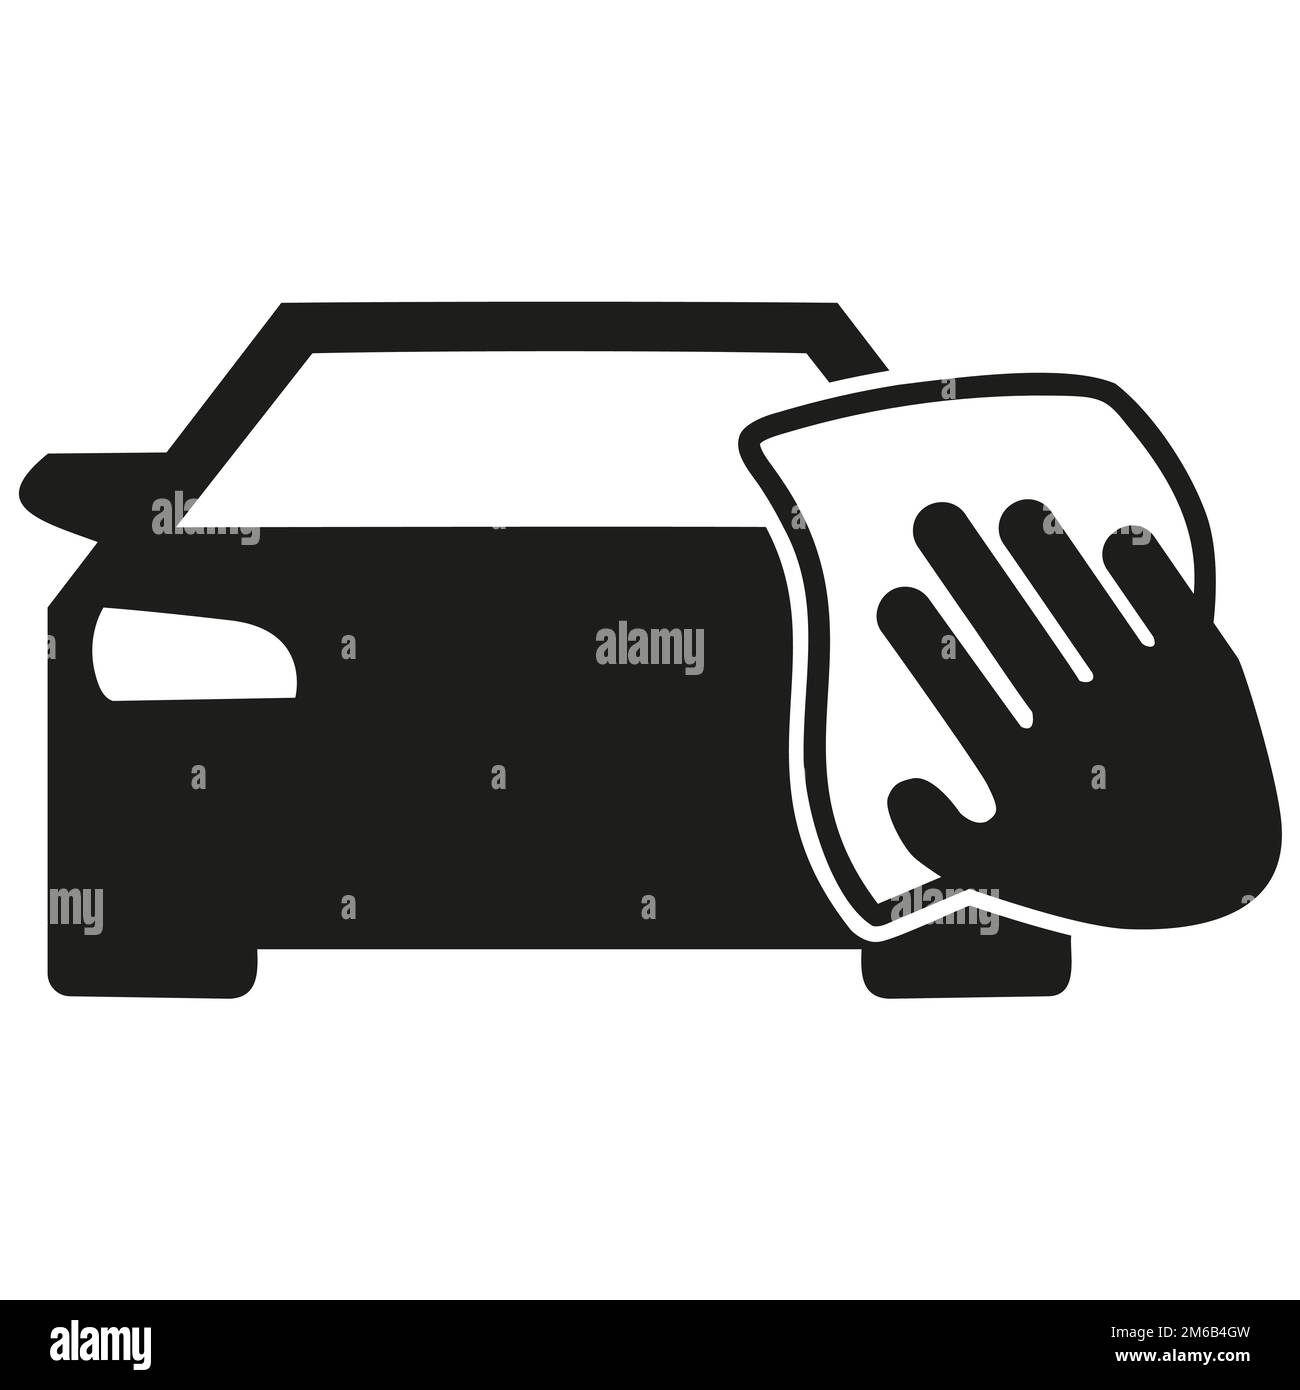 Car wash icon with hand wash and sponge flat design black, vector. Car care and detailing Stock Vector